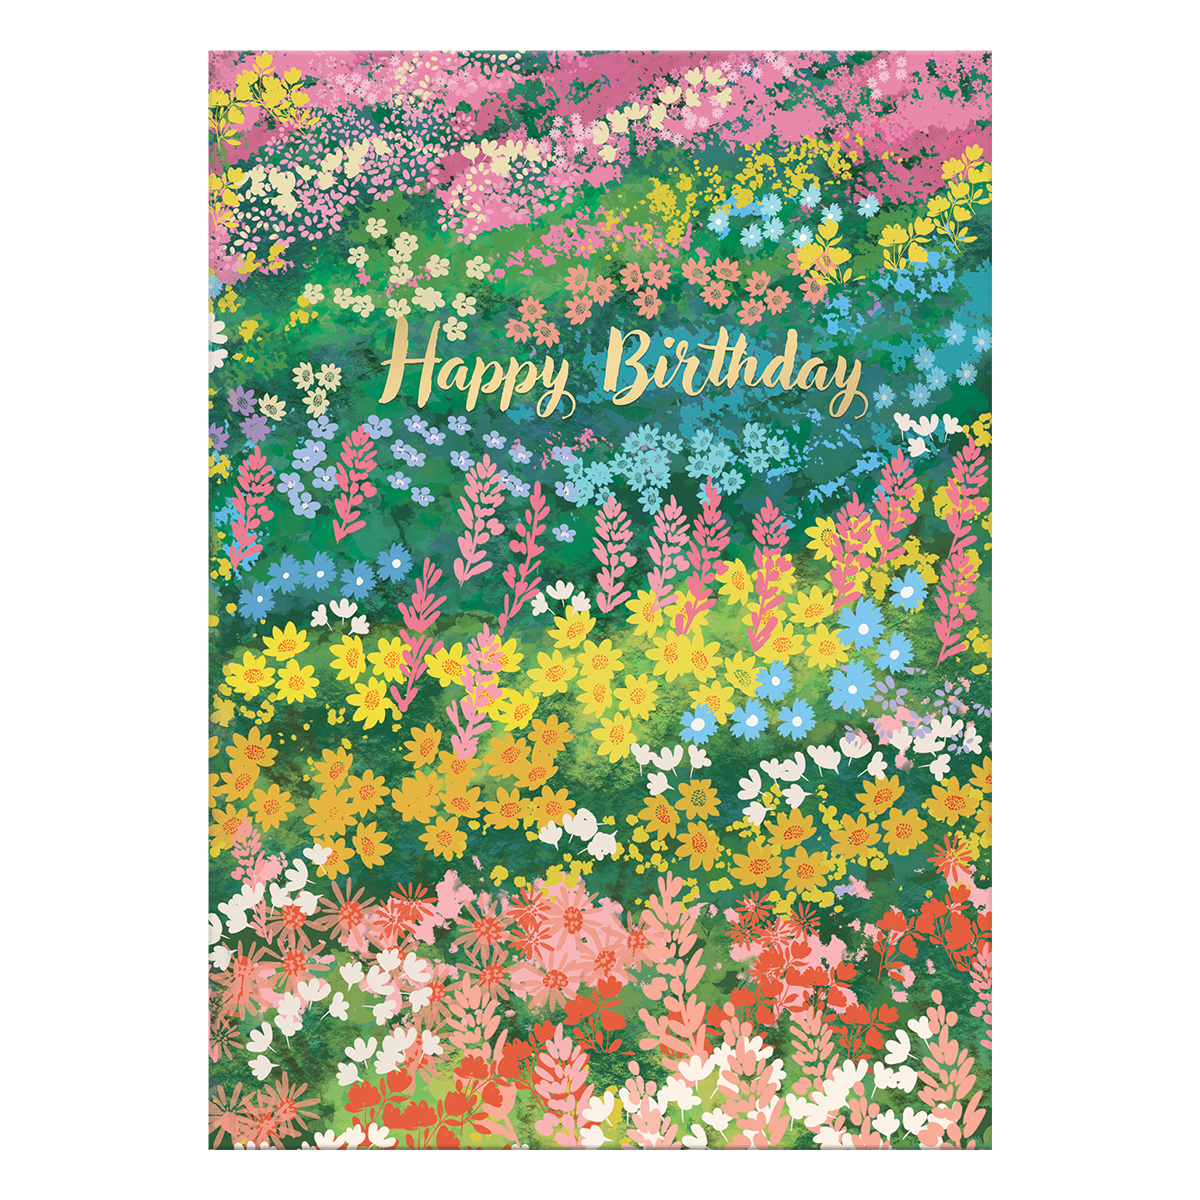 Flower Field Greeting Card Product